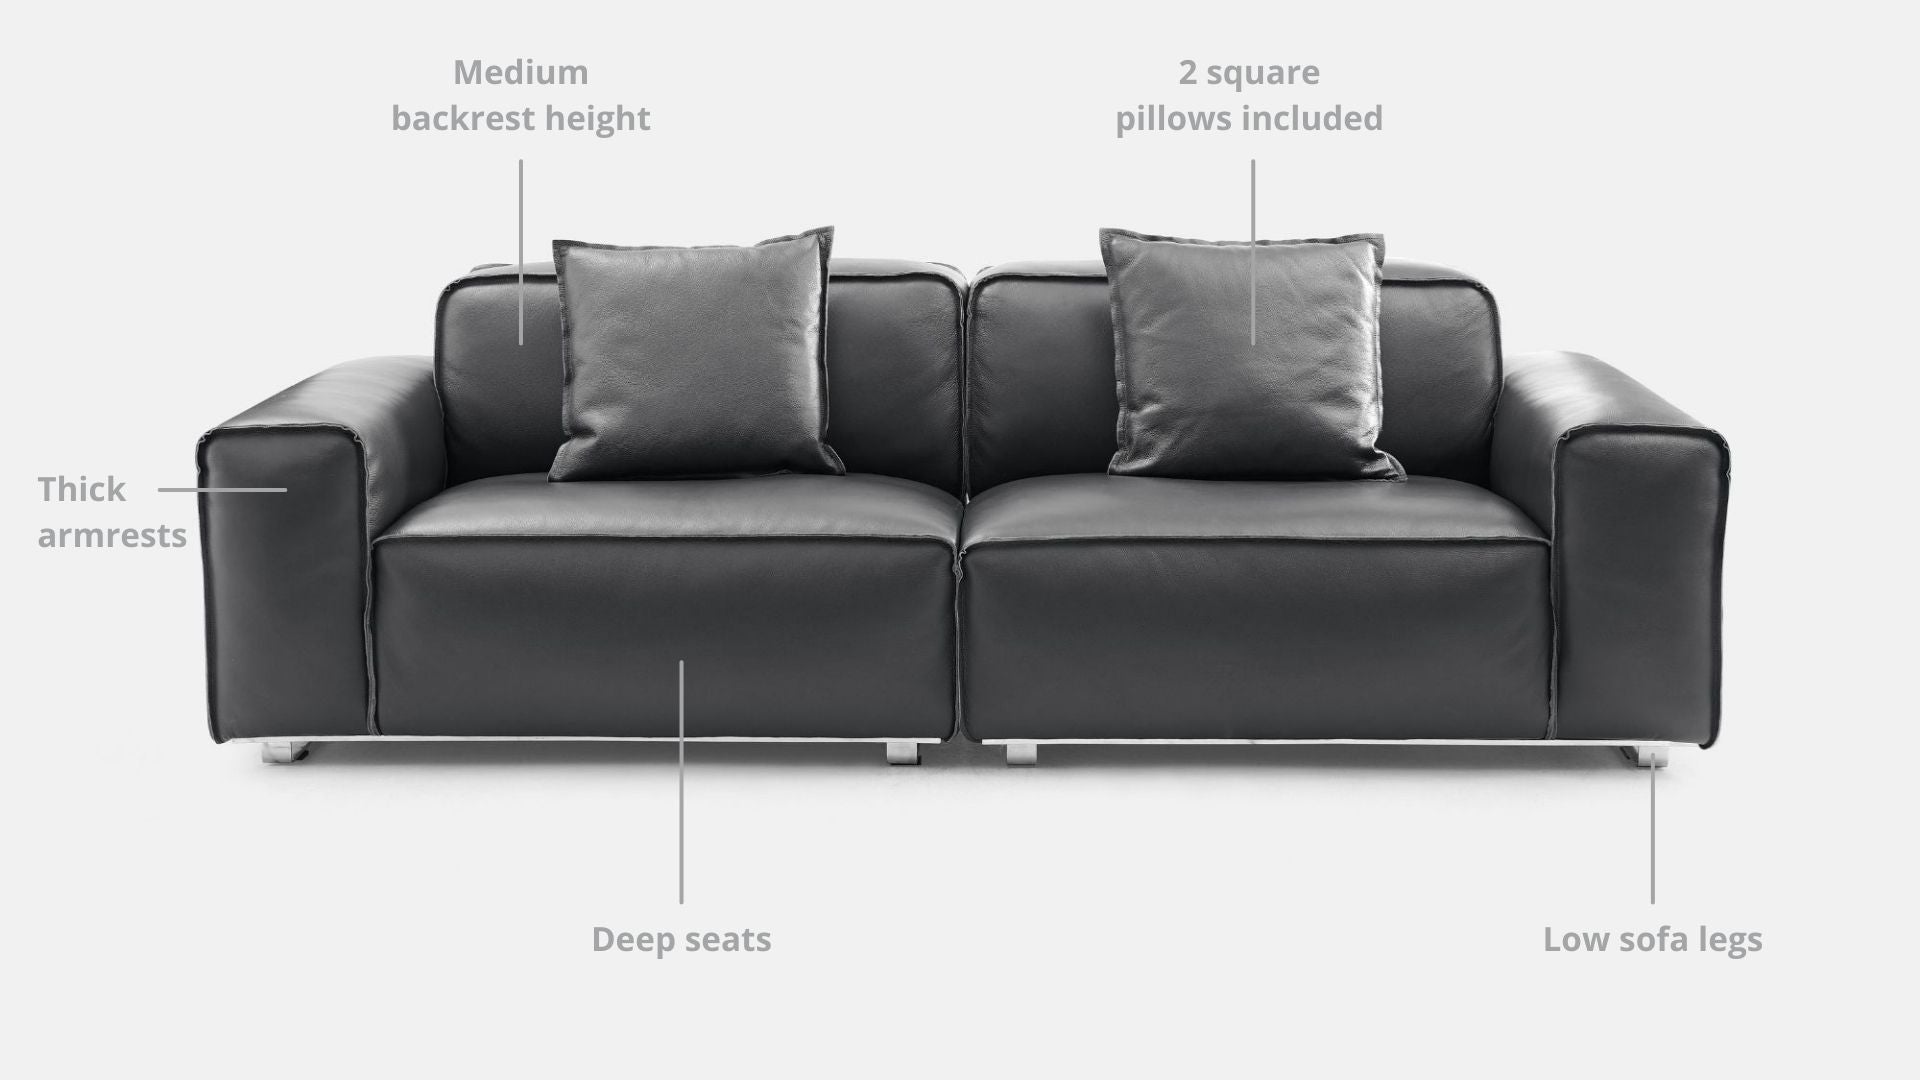 Key features such as armrest thickness, cushion height, seat depth and sofa leg height for Colby Full Leather Sofa